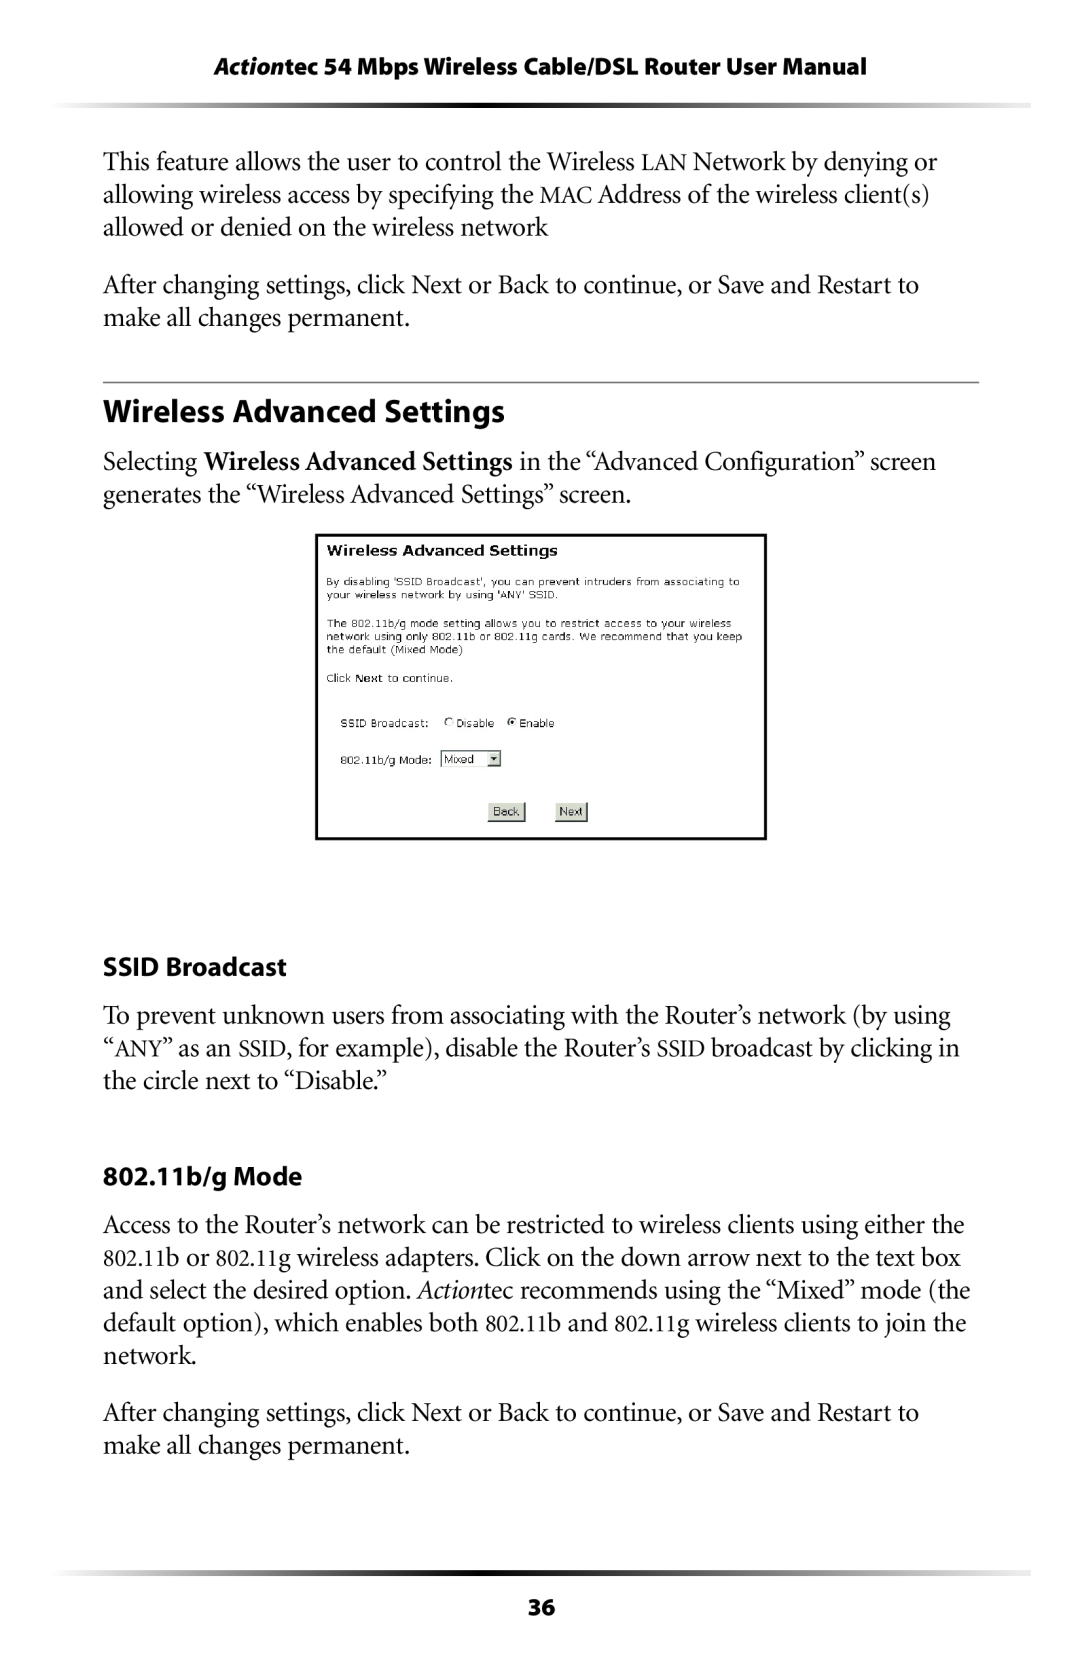 Actiontec electronic GT704WR user manual Wireless Advanced Settings 